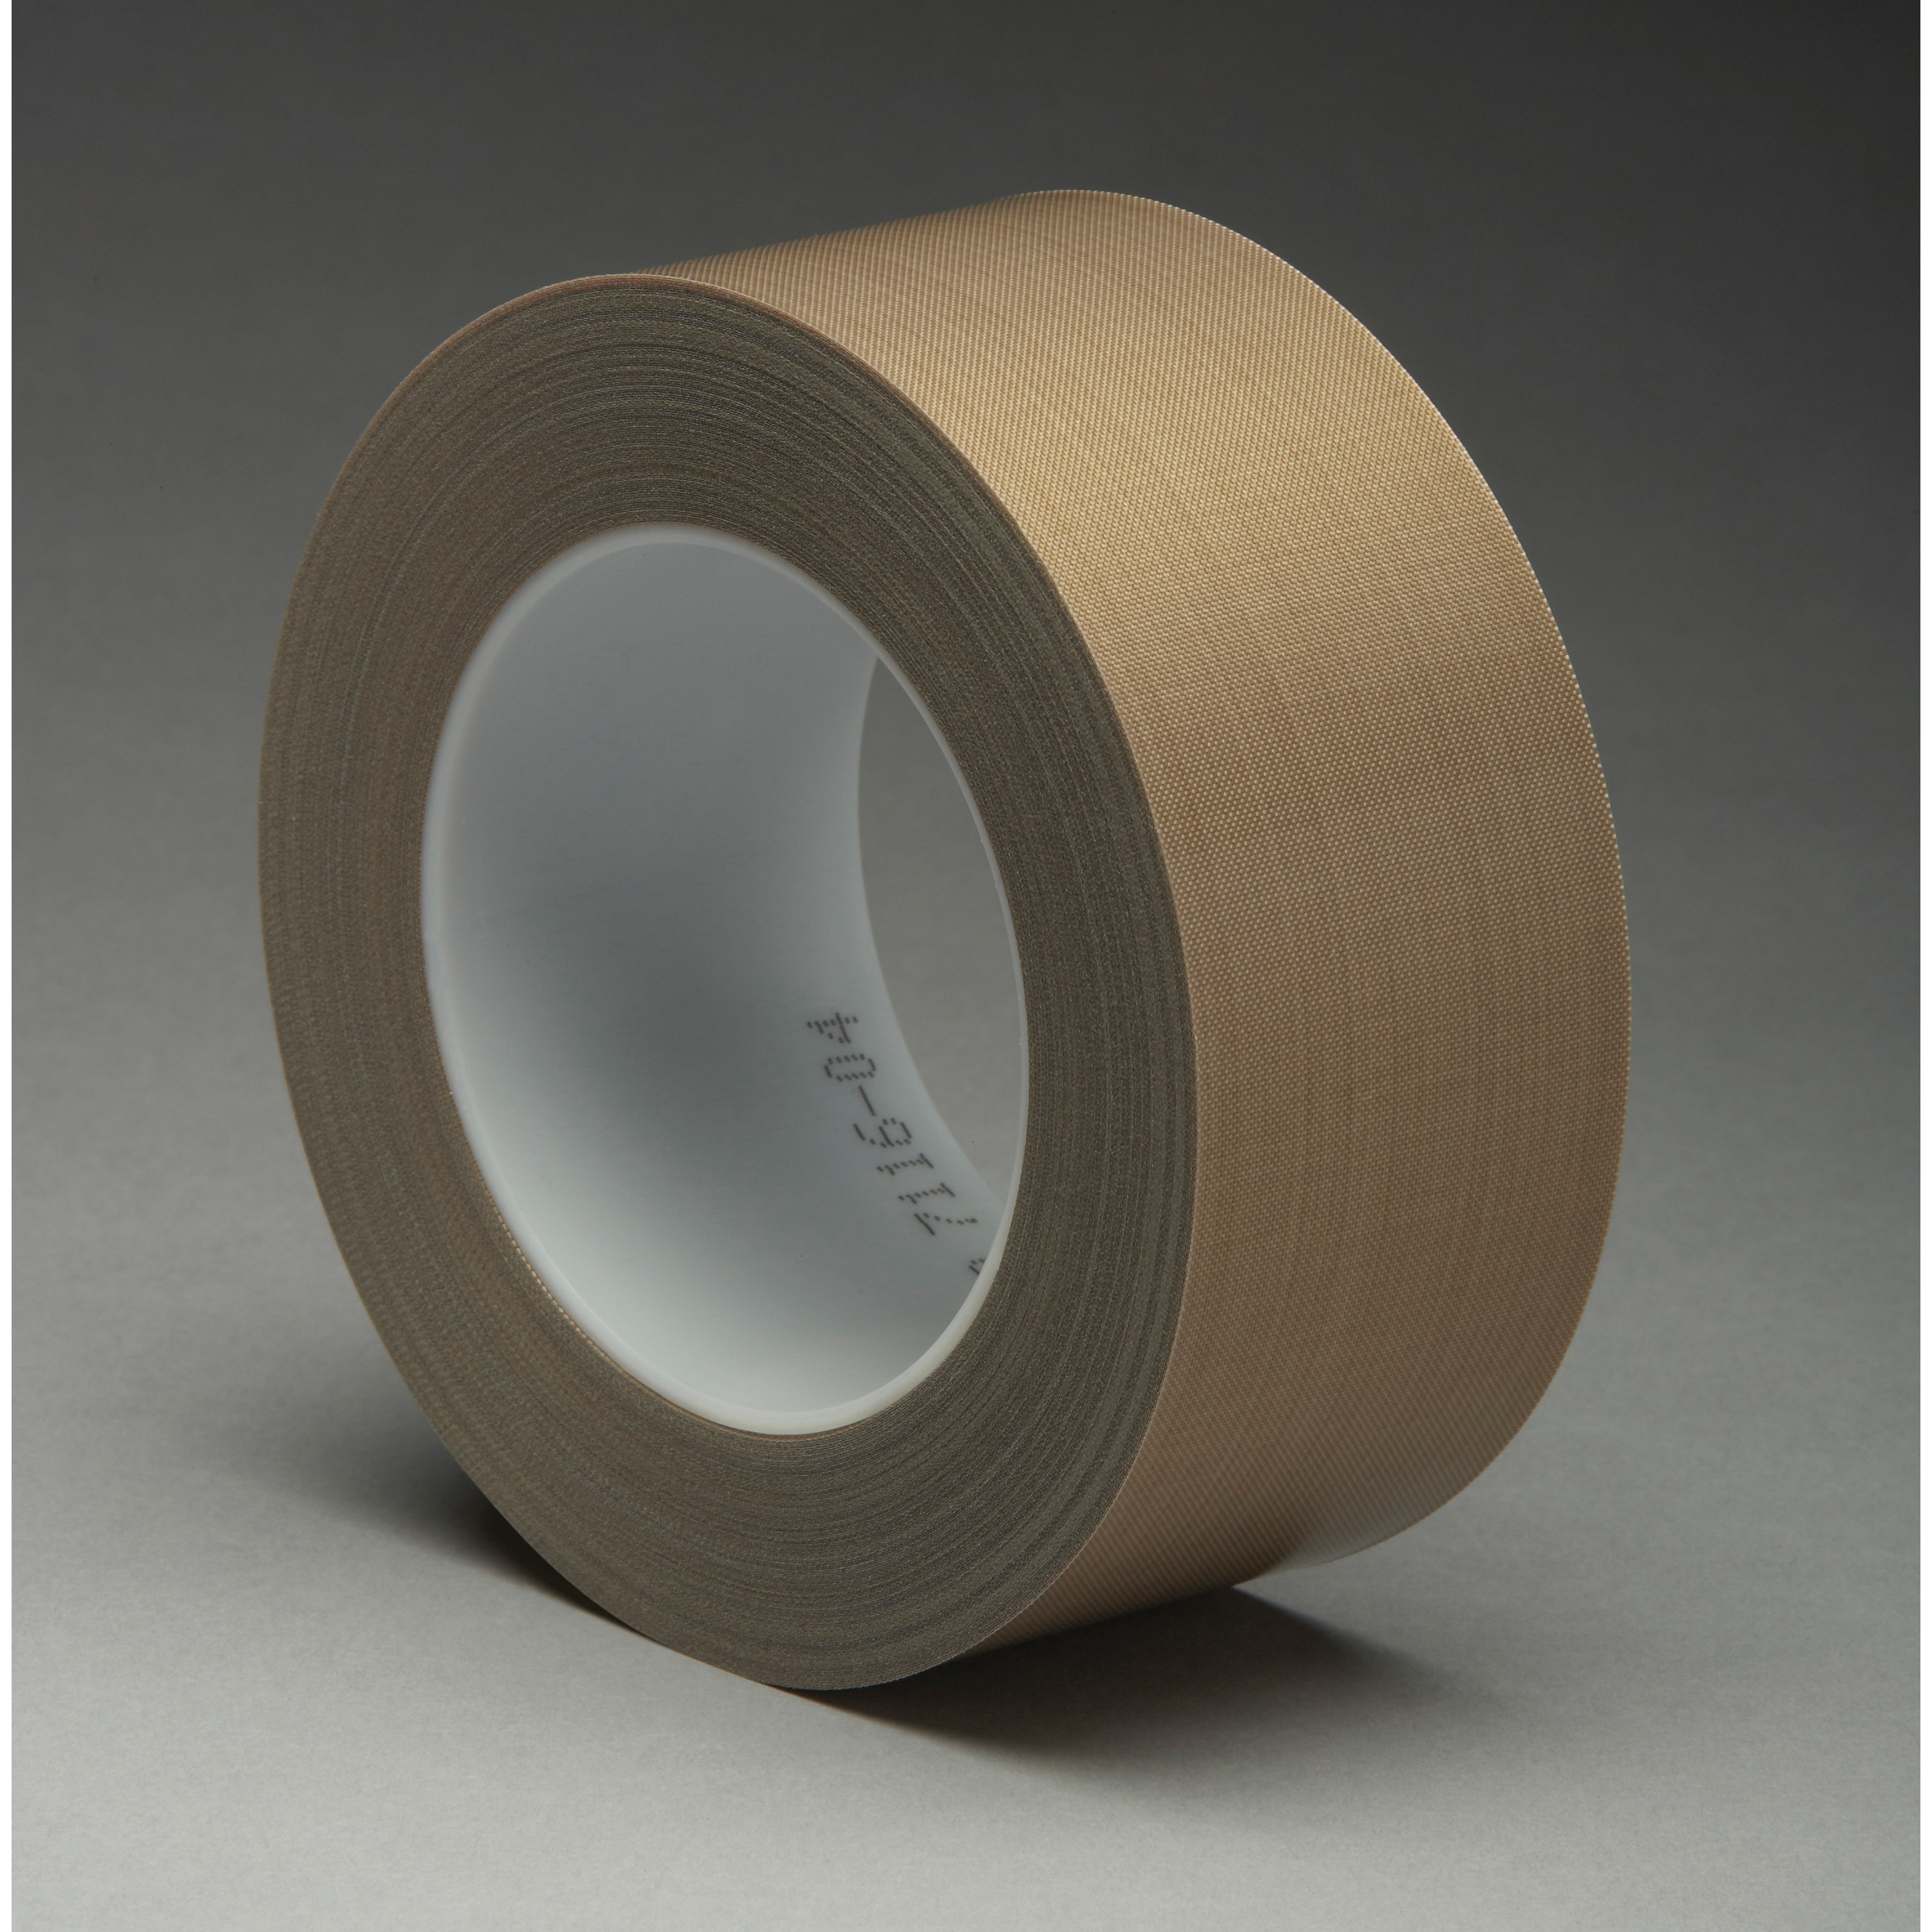 3M™ 021200-16161 Pressure Sensitive Glass Cloth Tape, 36 yd L x 1-1/2 in W, 8.2 mil THK, Silicon Adhesive, Woven Glass Cloth Impregnated with PTFE Backing, Brown